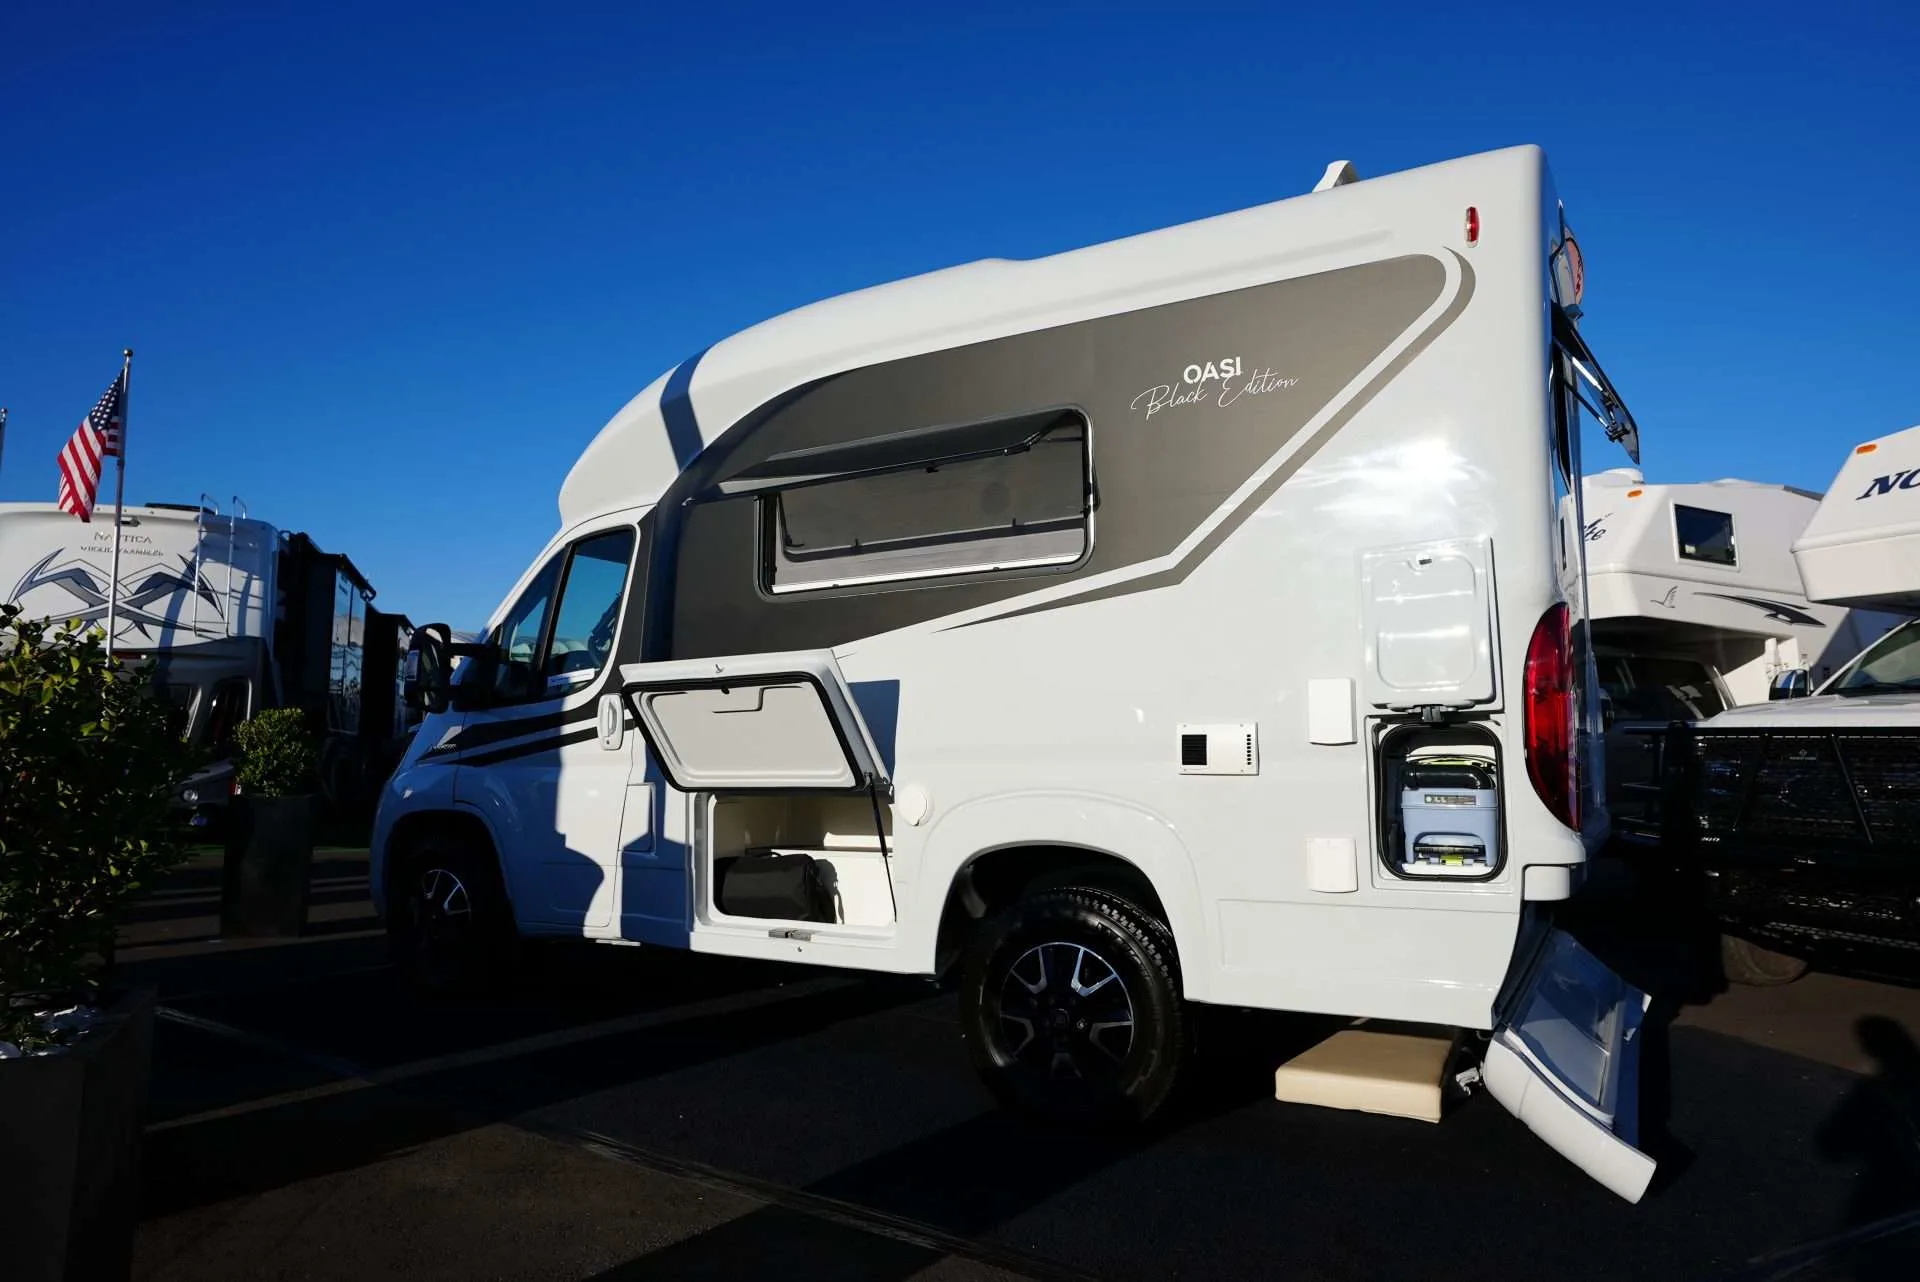 Exterior image of Wingamm Oasi from Florida RV Show